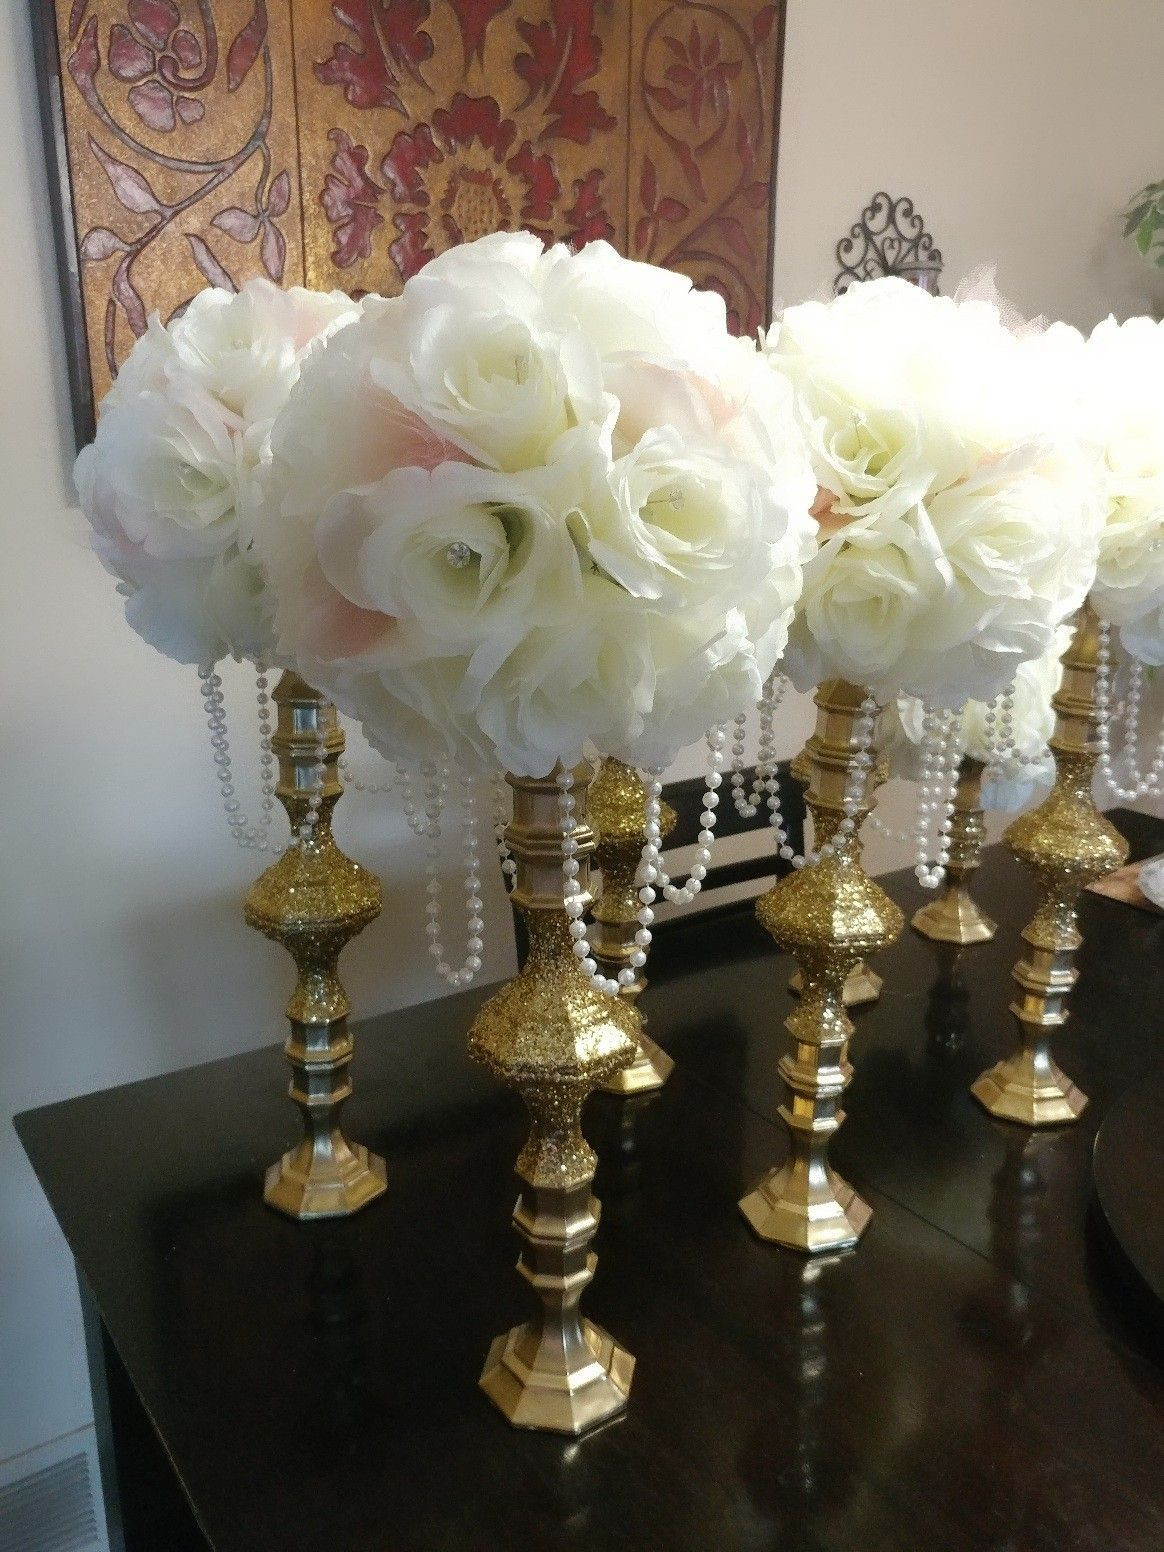 DIY Dollar Store Wedding Centerpieces
 Dollar Store Candle Holders